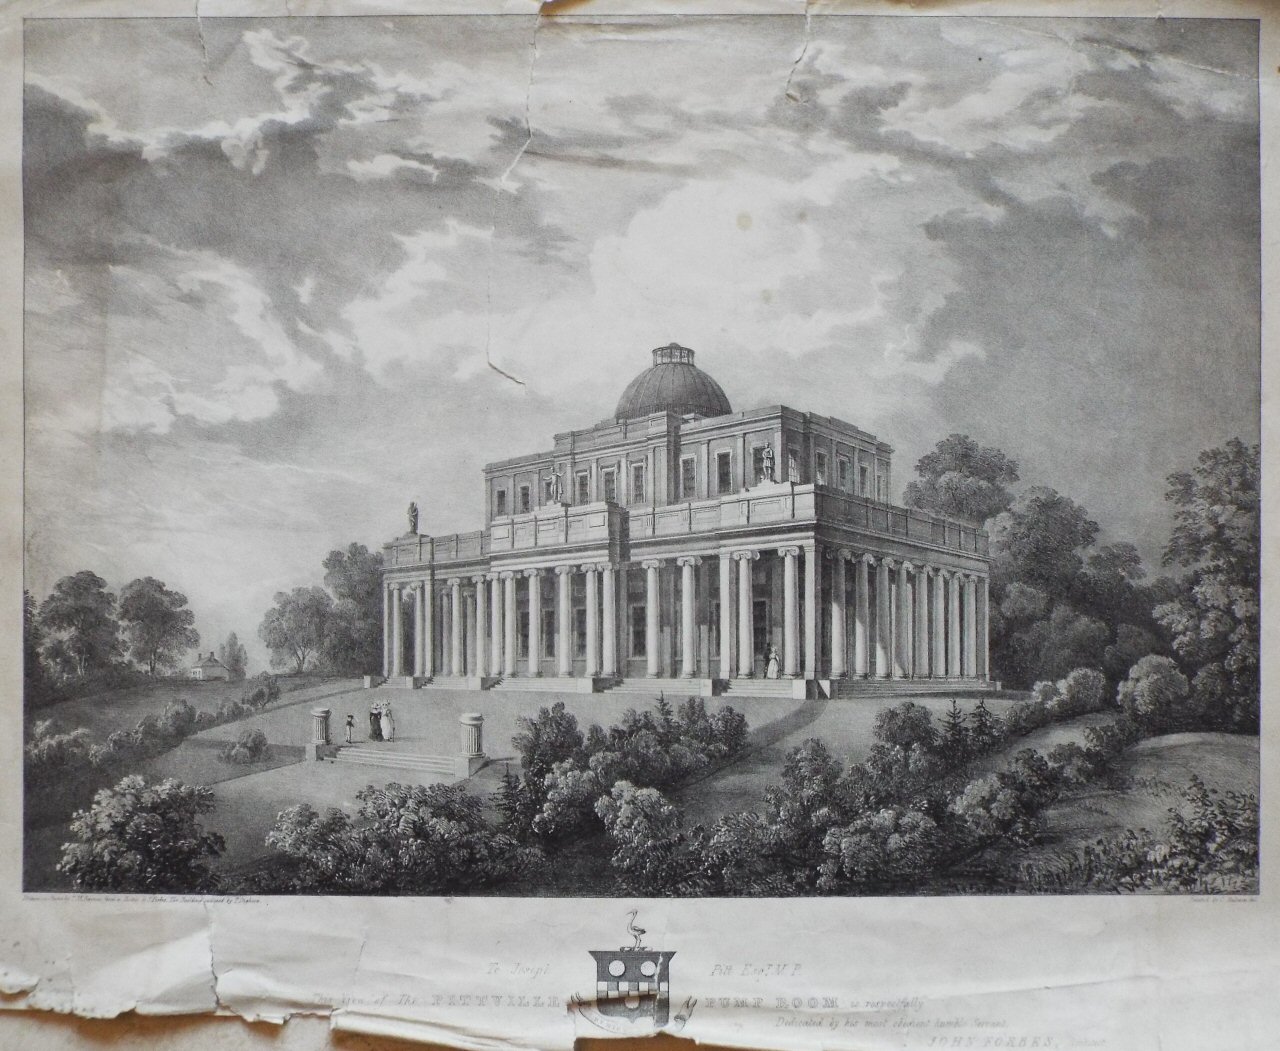 Lithograph - To Joseph Pitt Esqr. M. P. This View of The Pittville Pump Room is respectfully Dedicate by his most obedient humble Servant, John Forbes, Architect. - Baynes